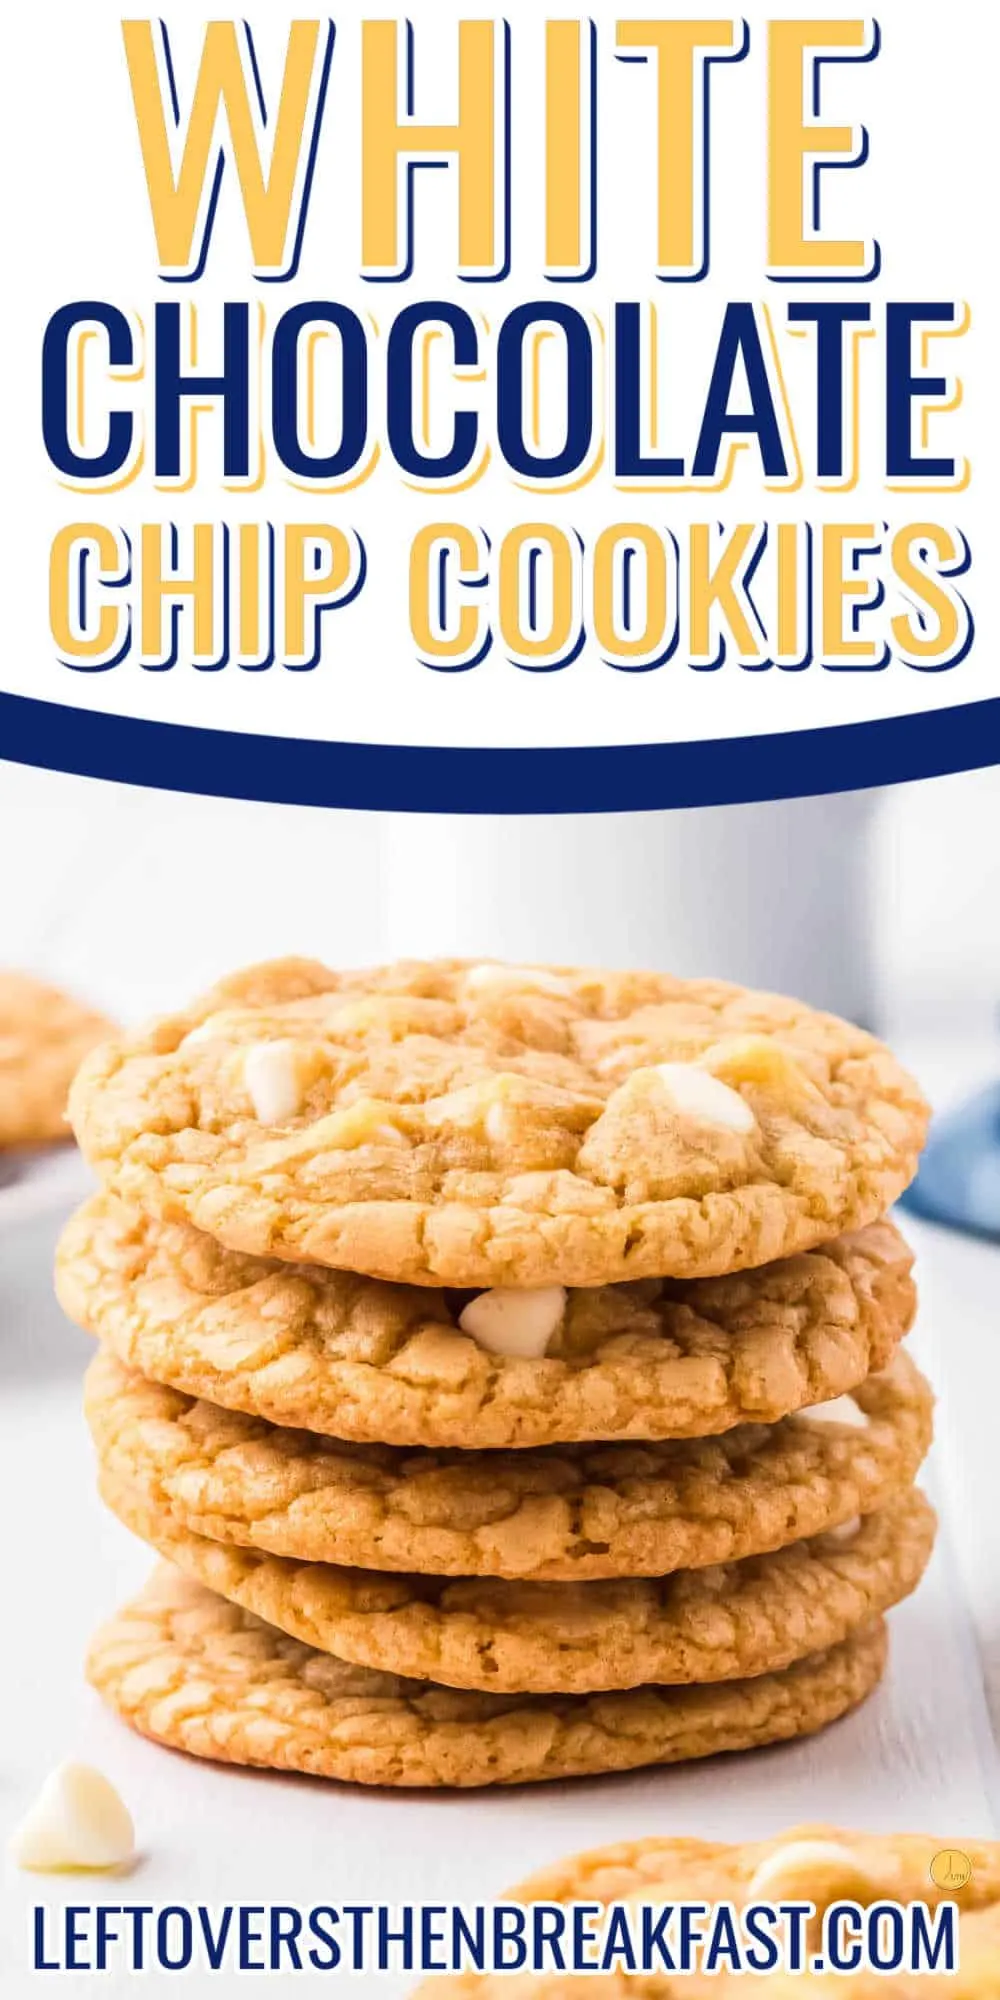 stack of white chocolate chip cookies on blue napkin with white banner and text